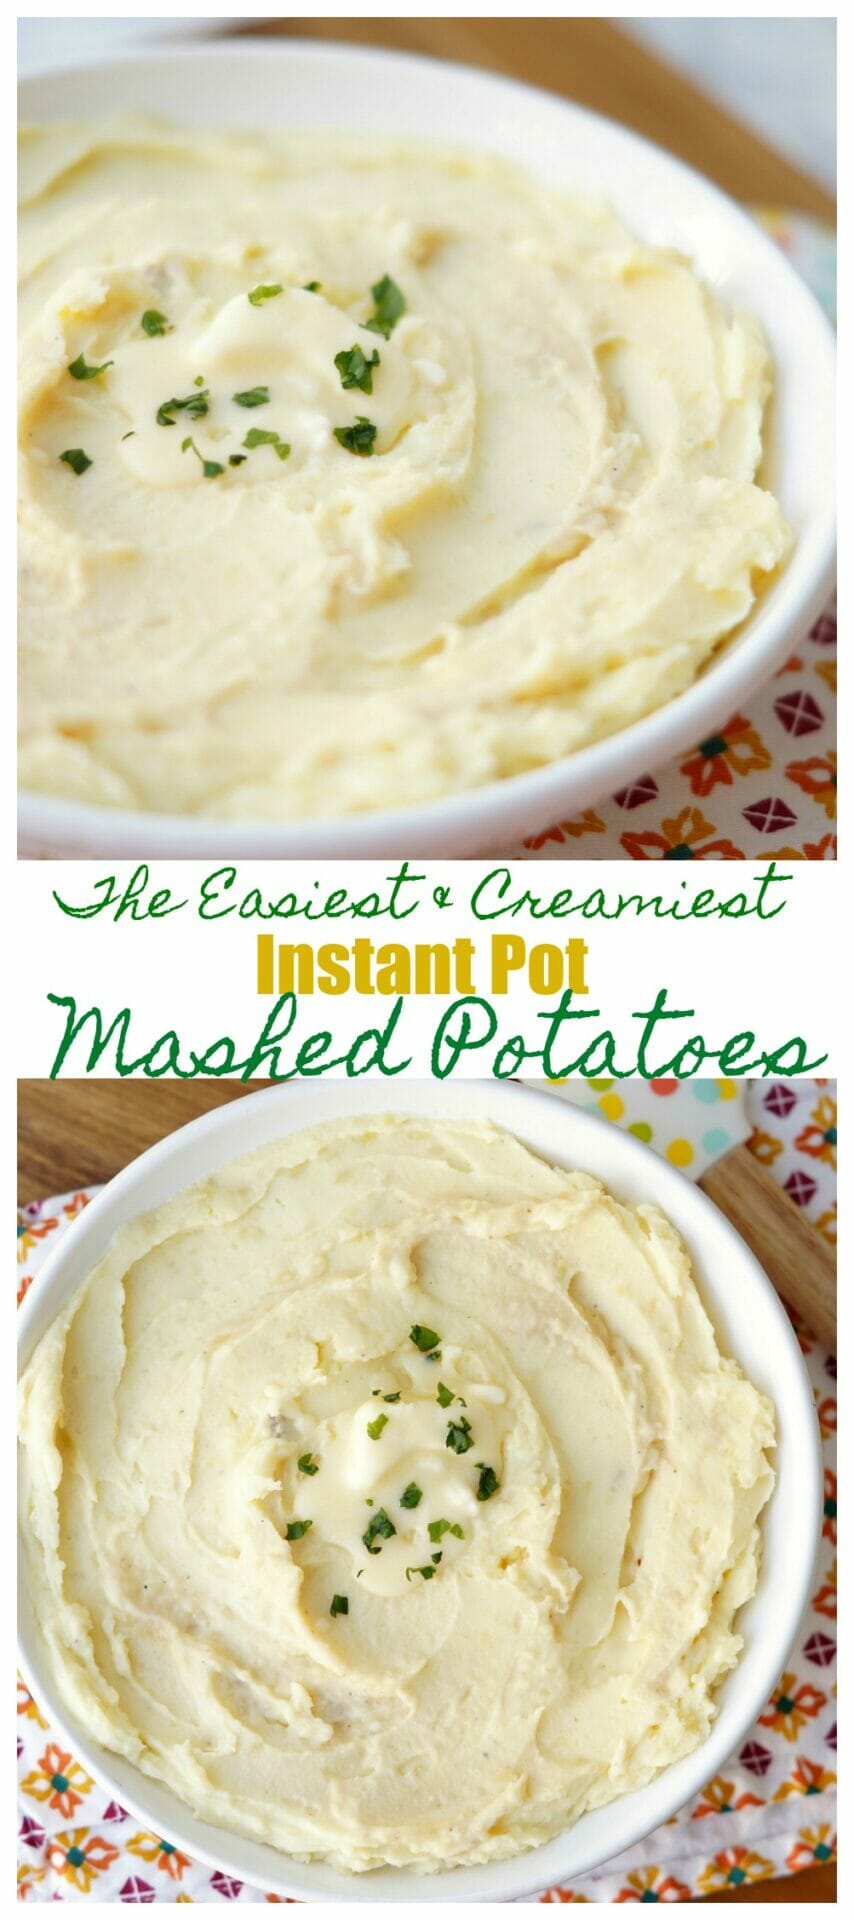 The absolute best Instant Pot Mashed Potatoes!